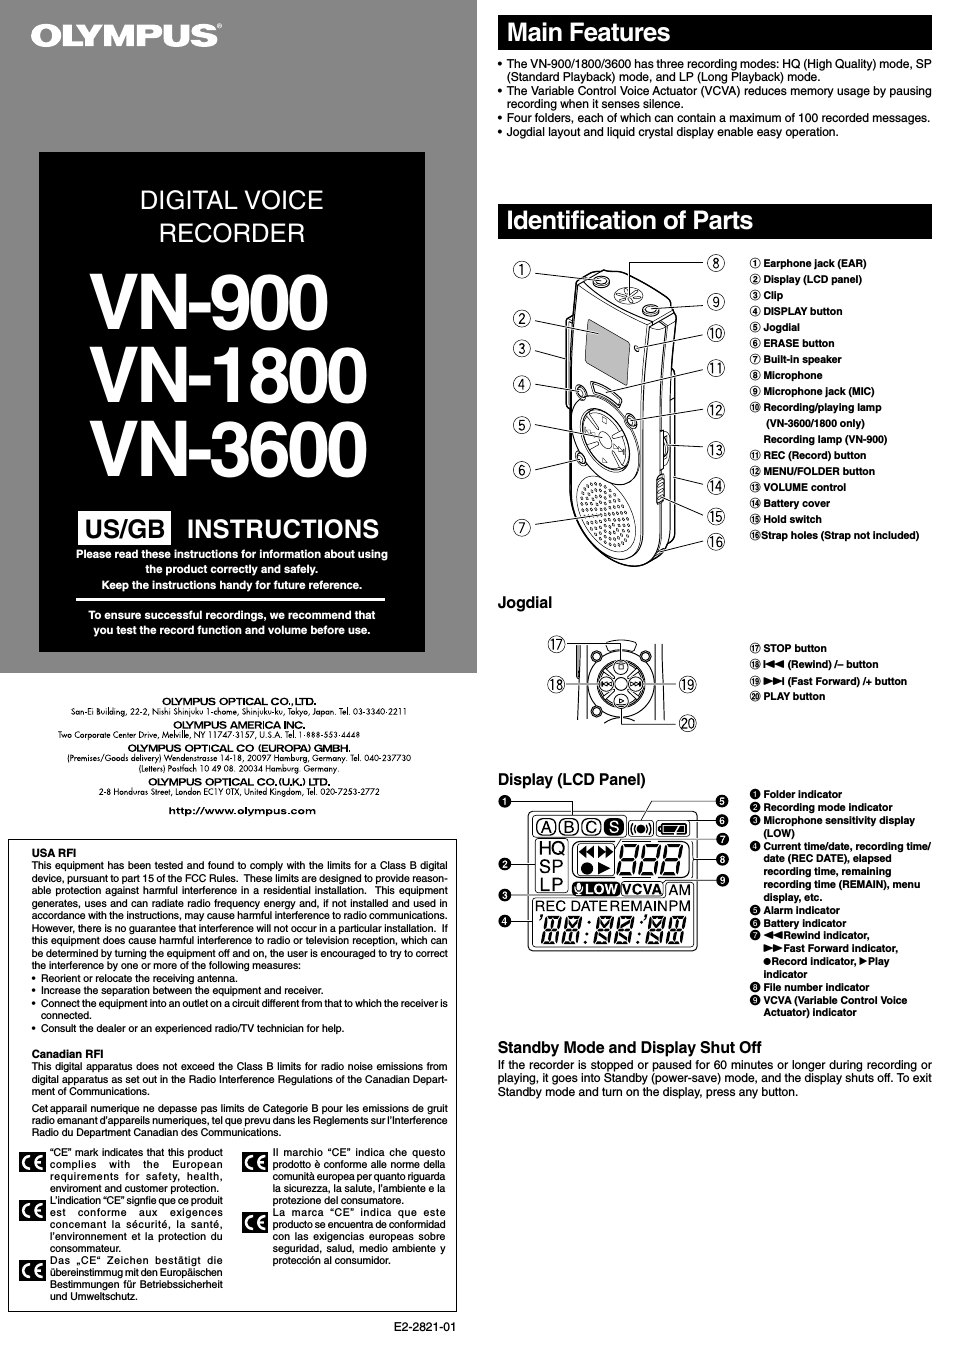 VN-3600 US